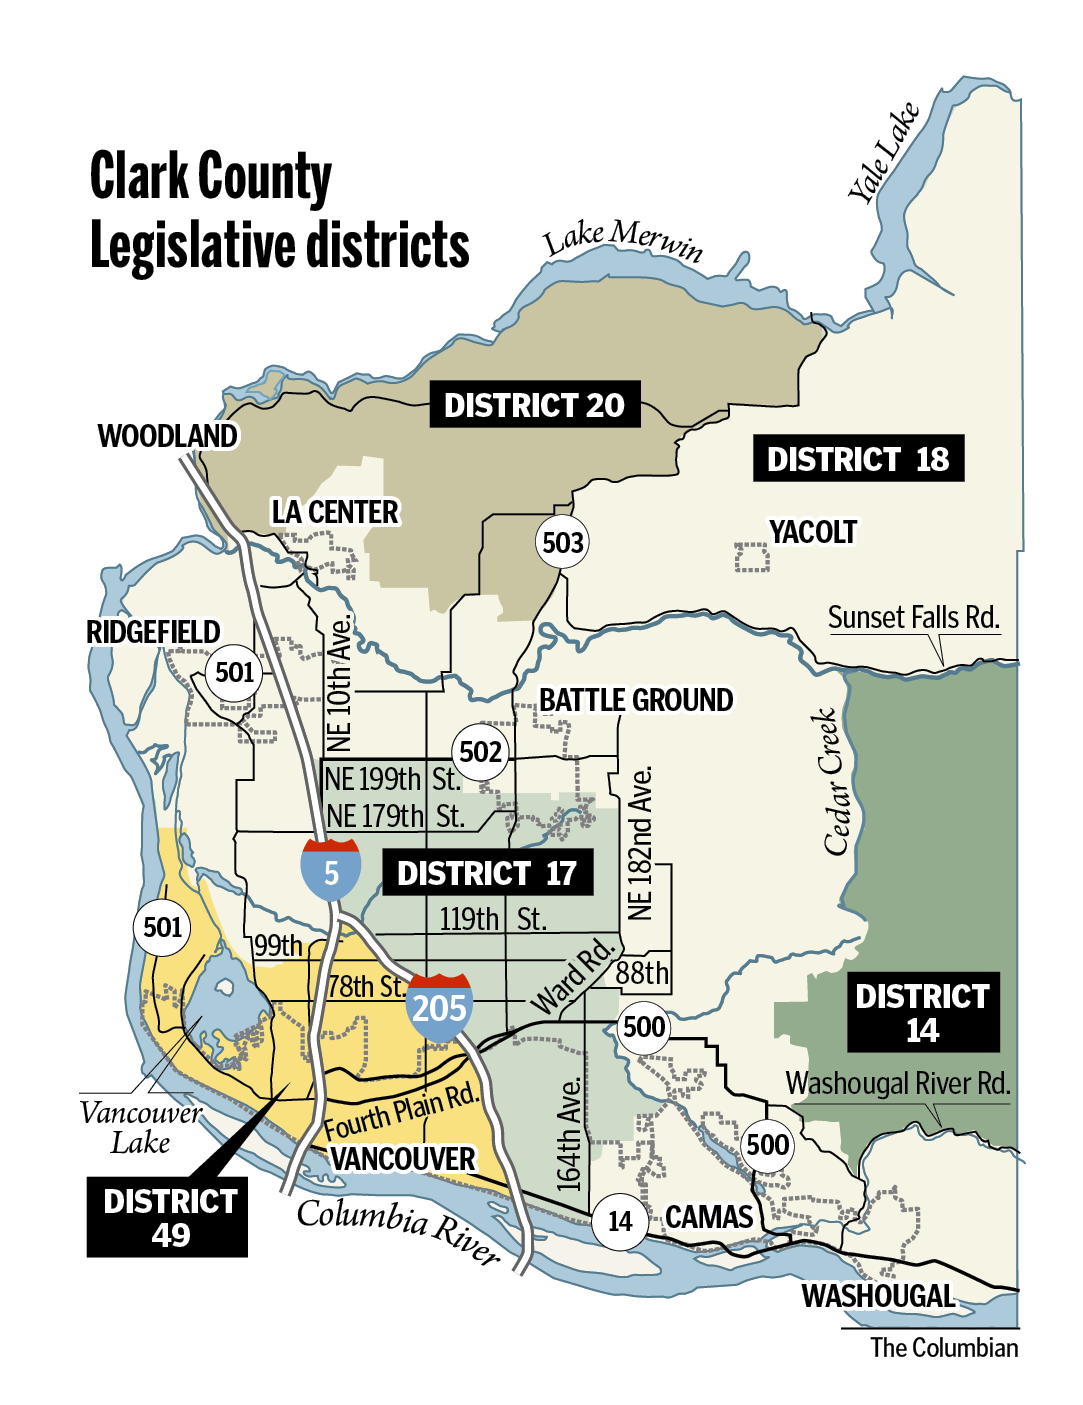 The legislative districts in Clark County include the 17th, 18th, 49th, 20th and 14th.